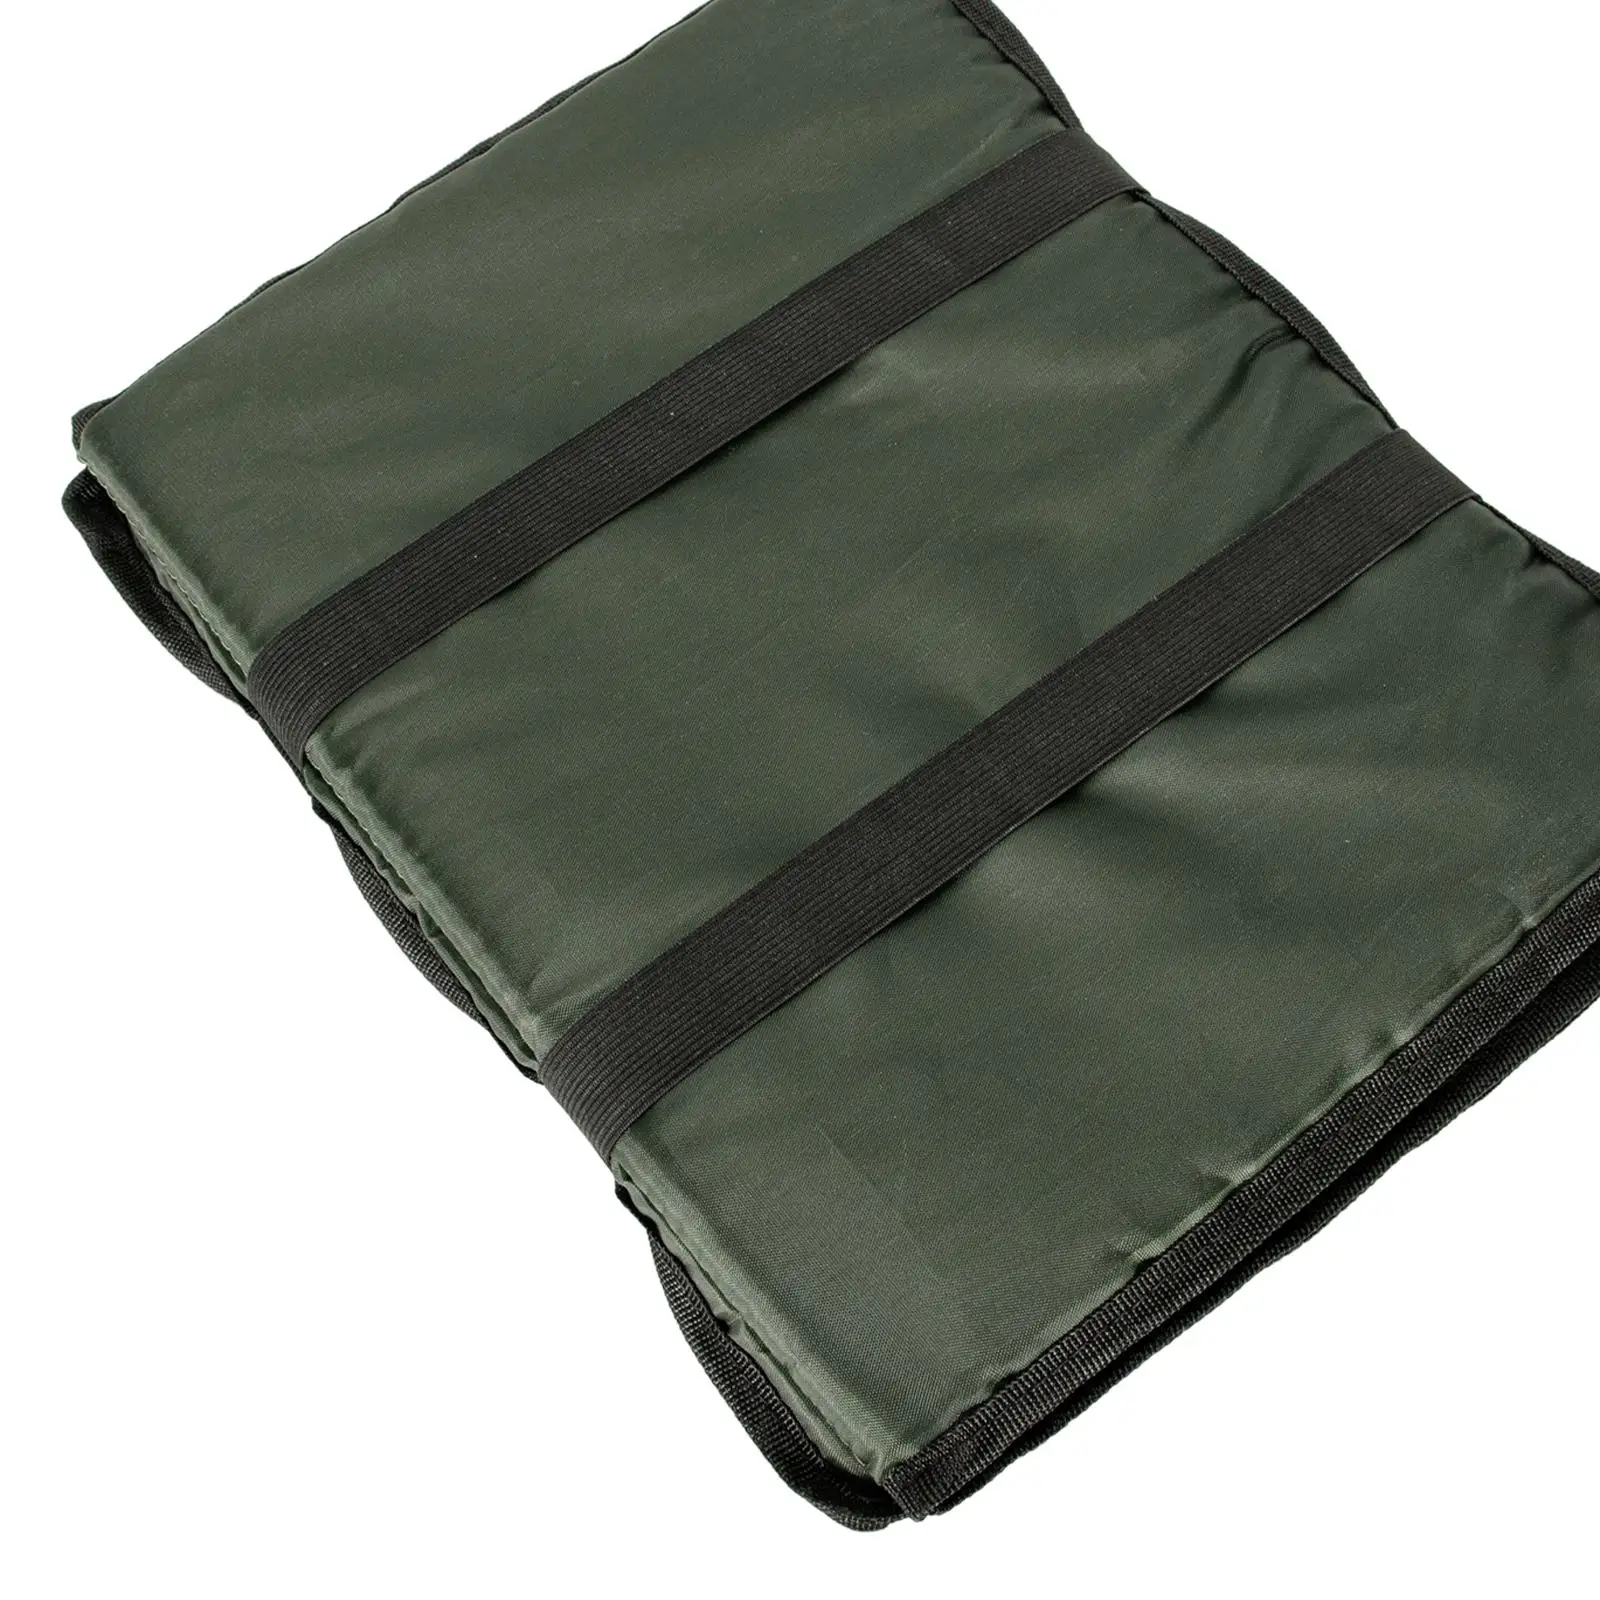 Carp Fishing Unhooking Mat with Small Lure Box Accessory Rolls up for Convenient Storage